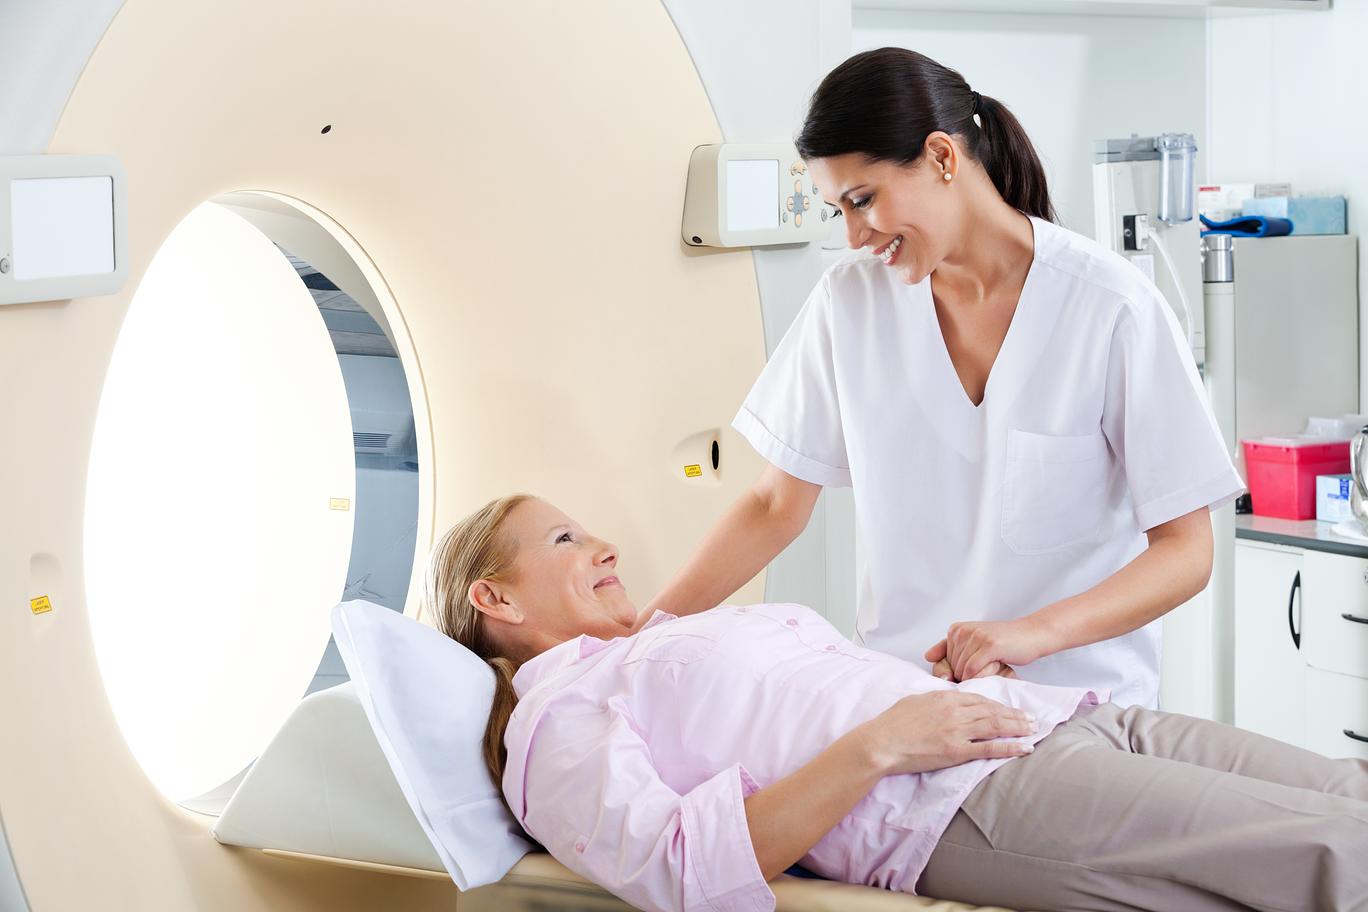 Imaging and Radiology Services